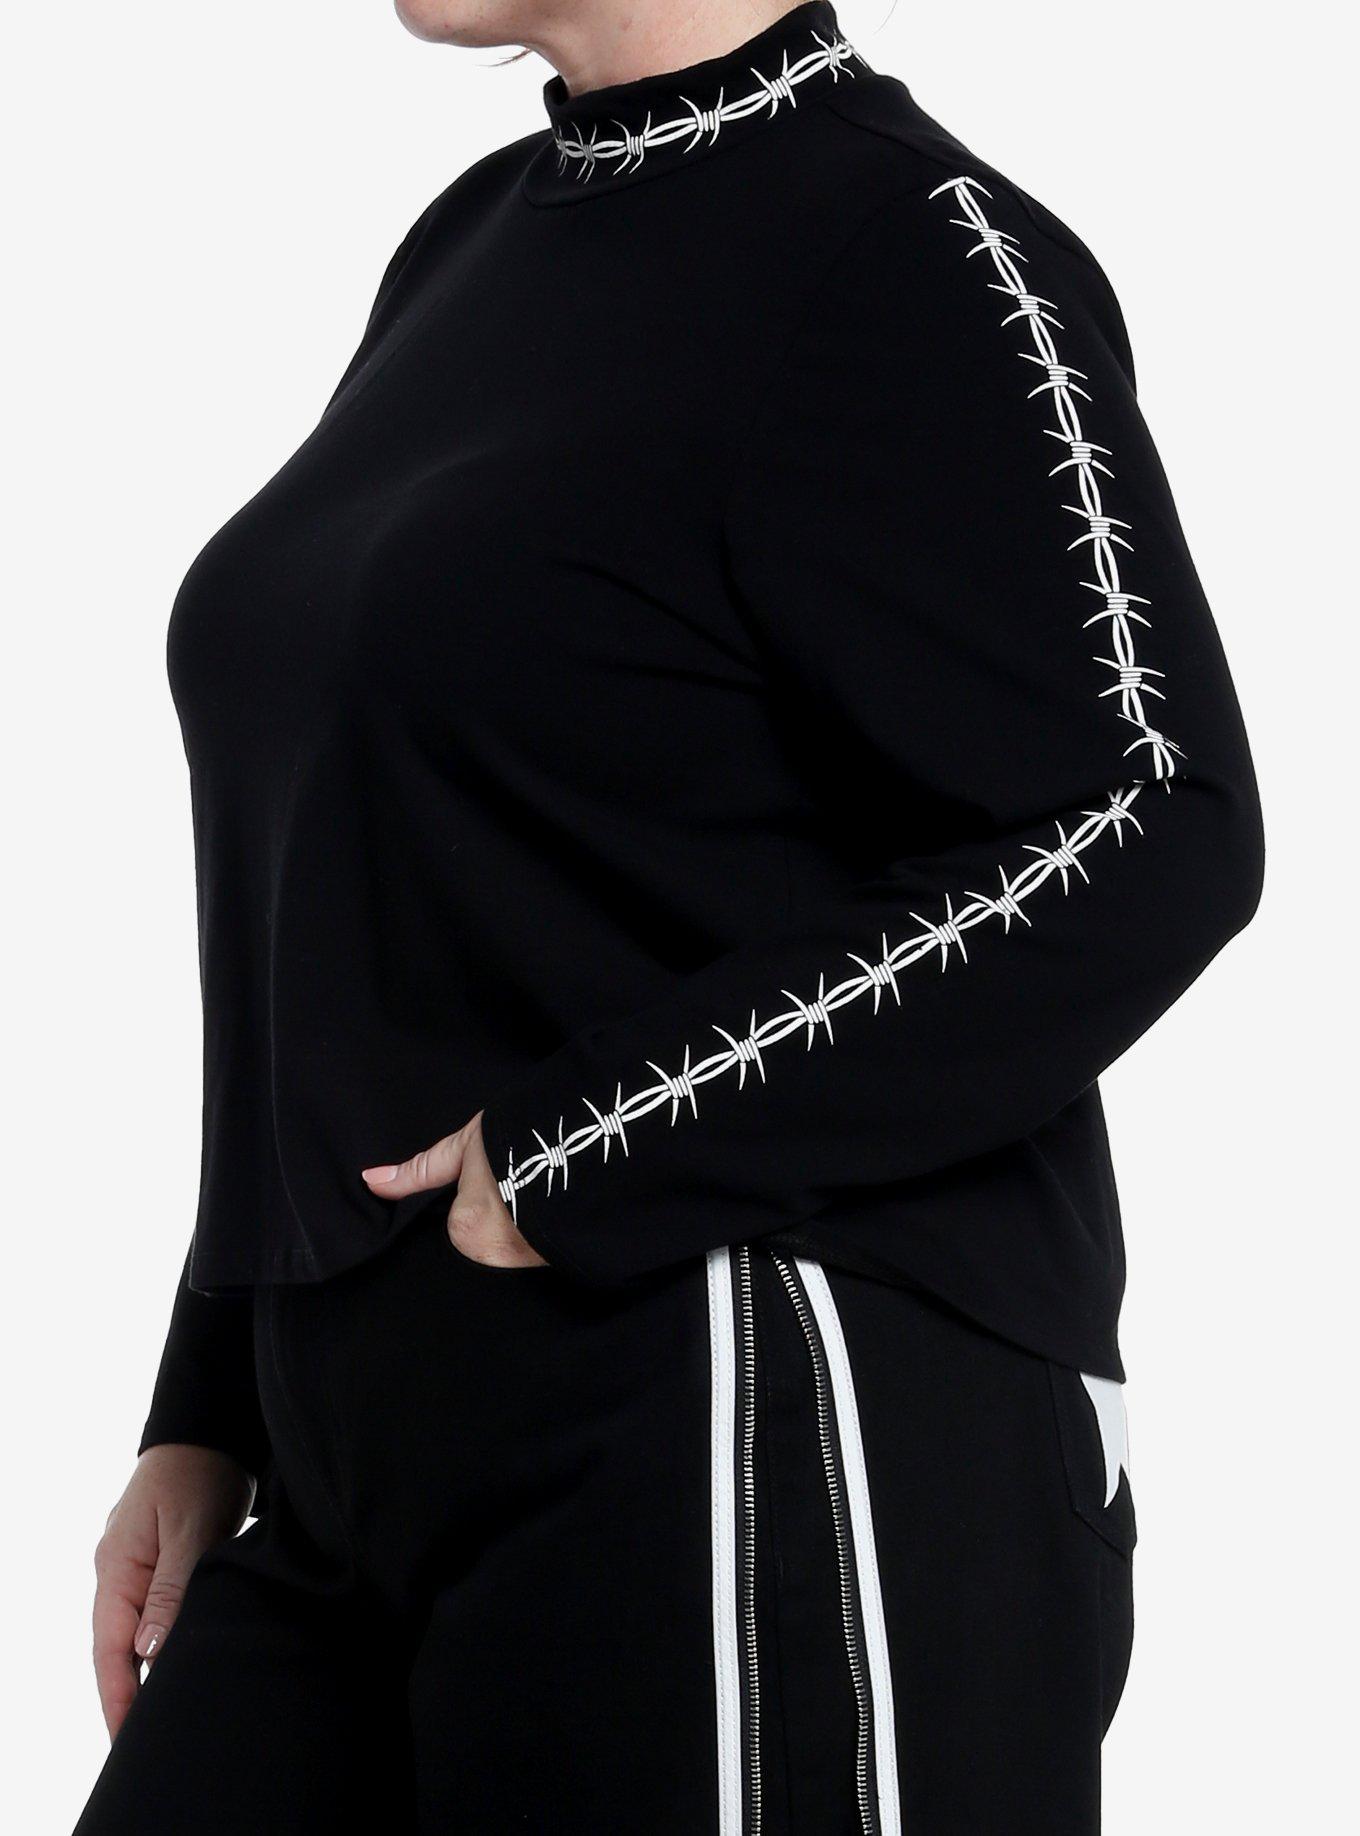 Social Collision Barbed Wire Girls Crop Long-Sleeve Top Plus